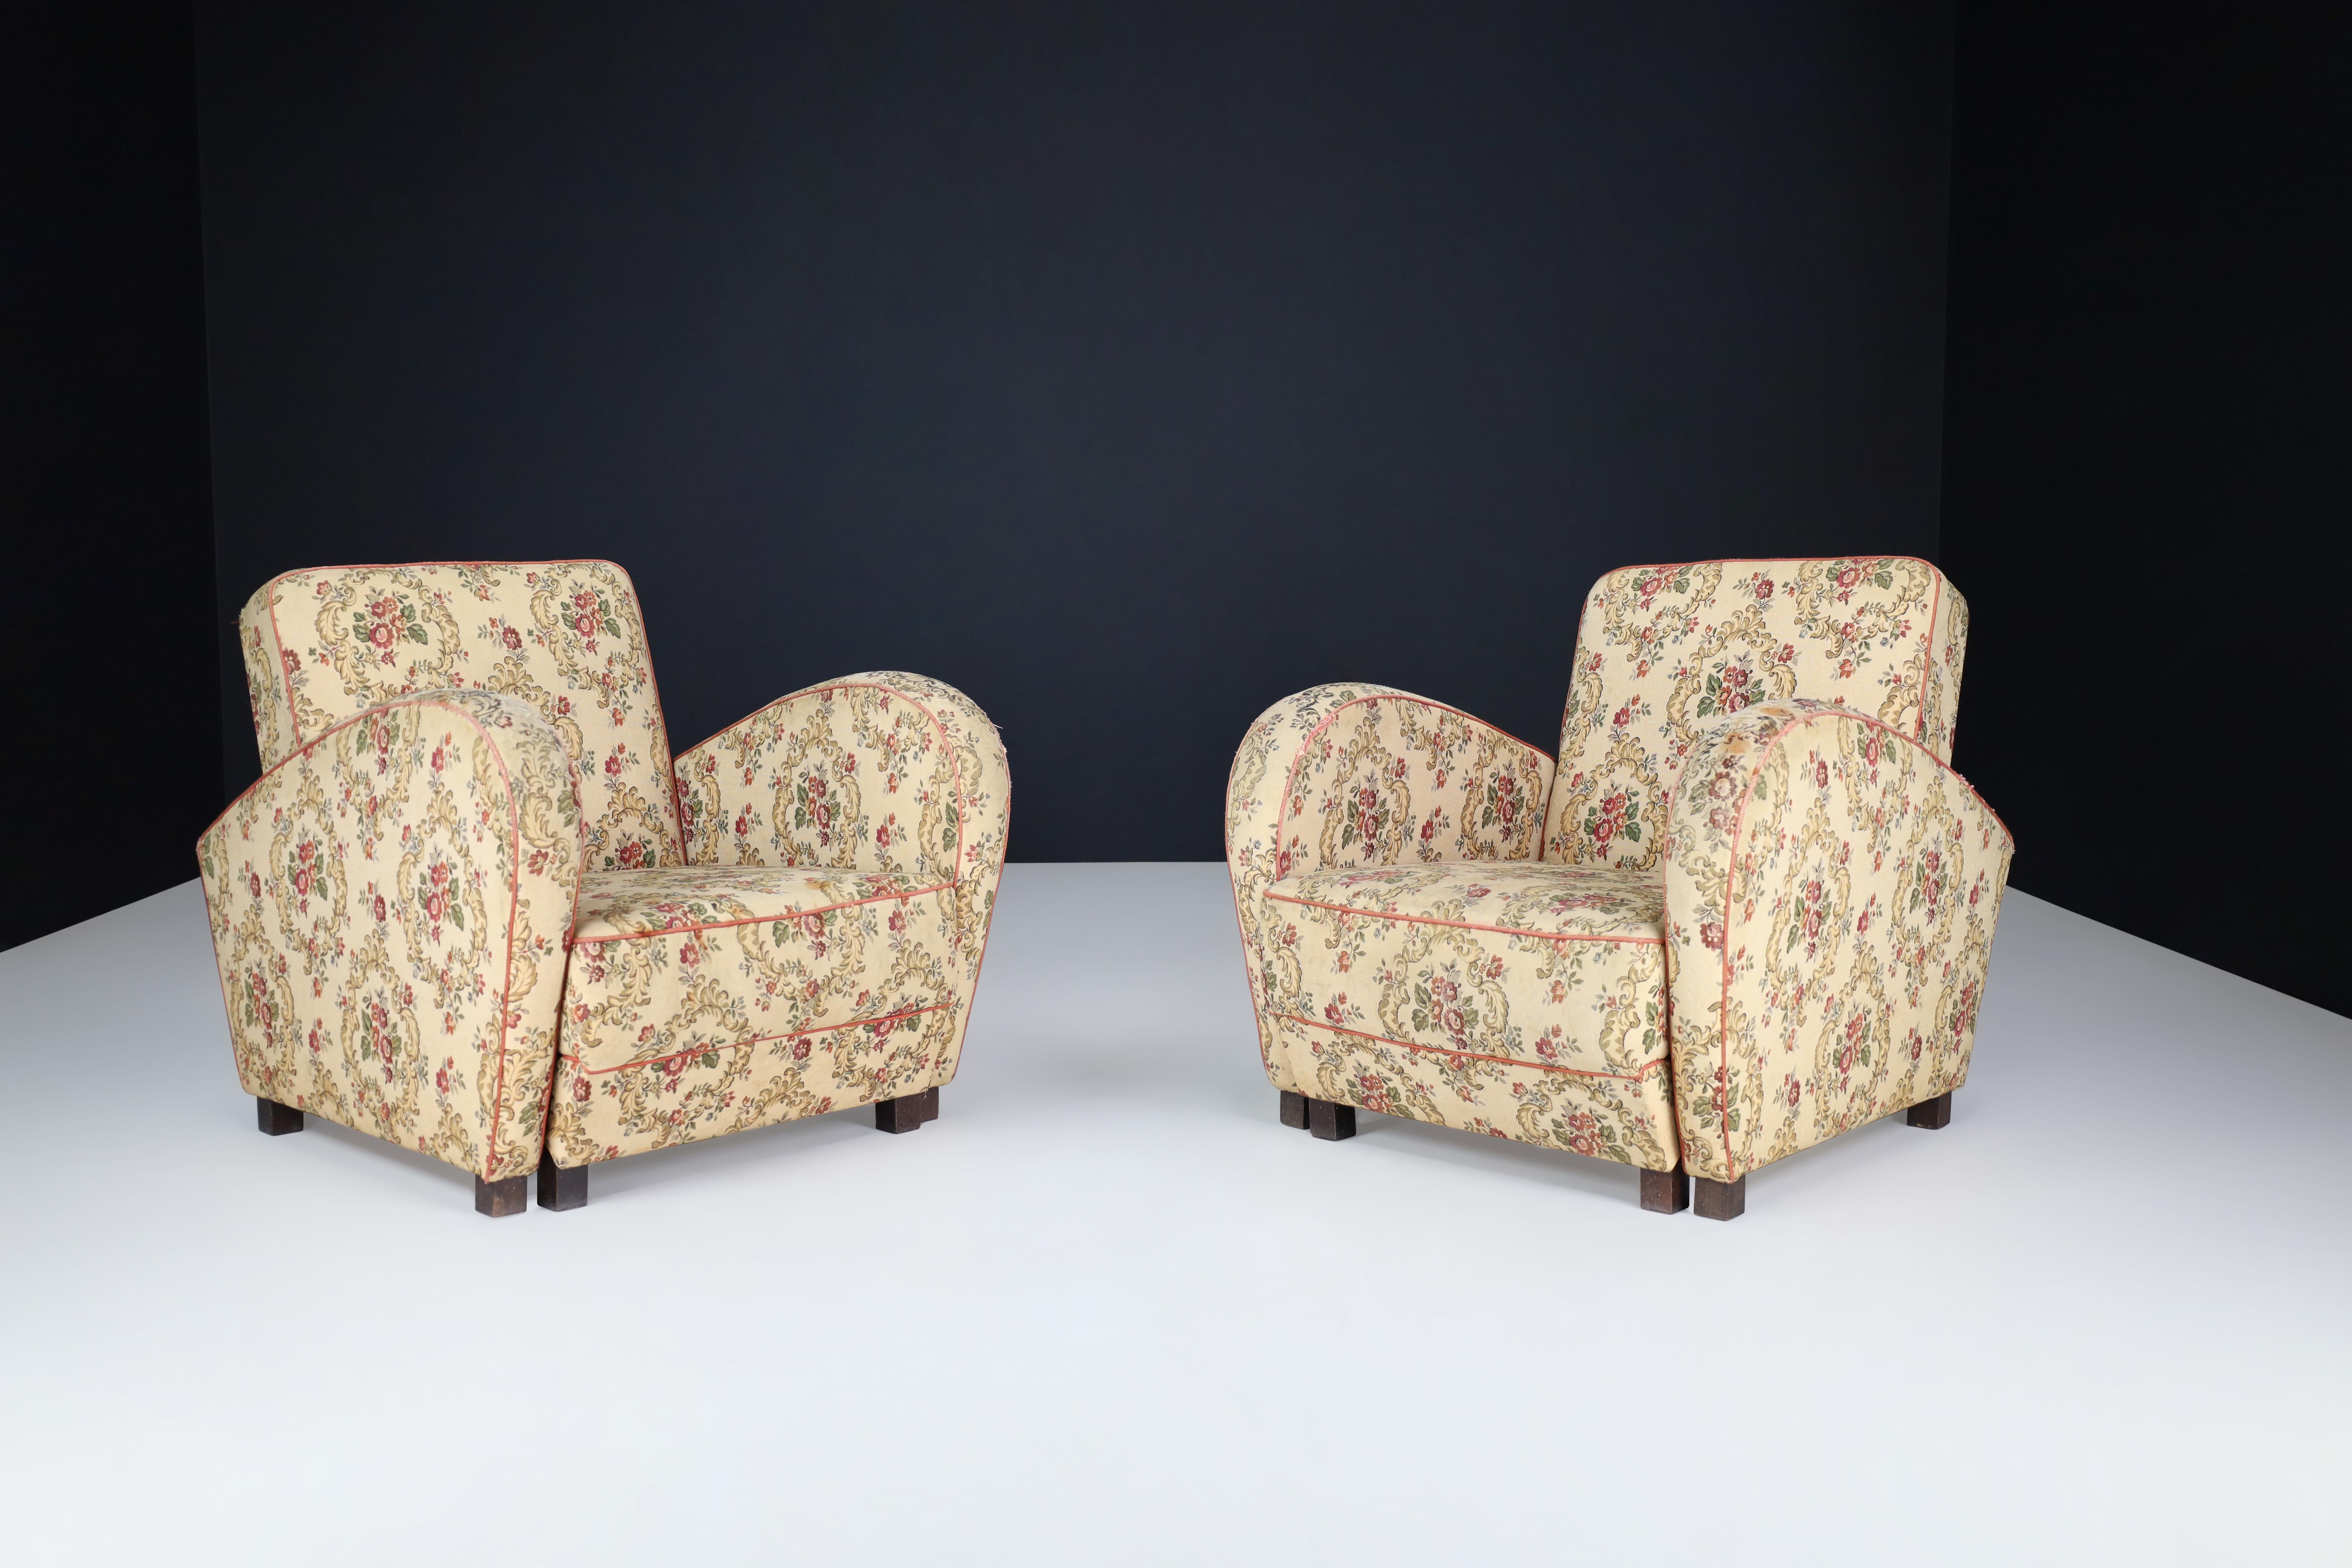 Jindrich Halabala Art Deco Lounge Chairs in Floral Upholstery.

This rare set of Art Deco lounge chairs/daybeds was designed by Jindrich Halabala, a Czech designer, in the 1930s. They are a testament to midcentury design in Central Europe,